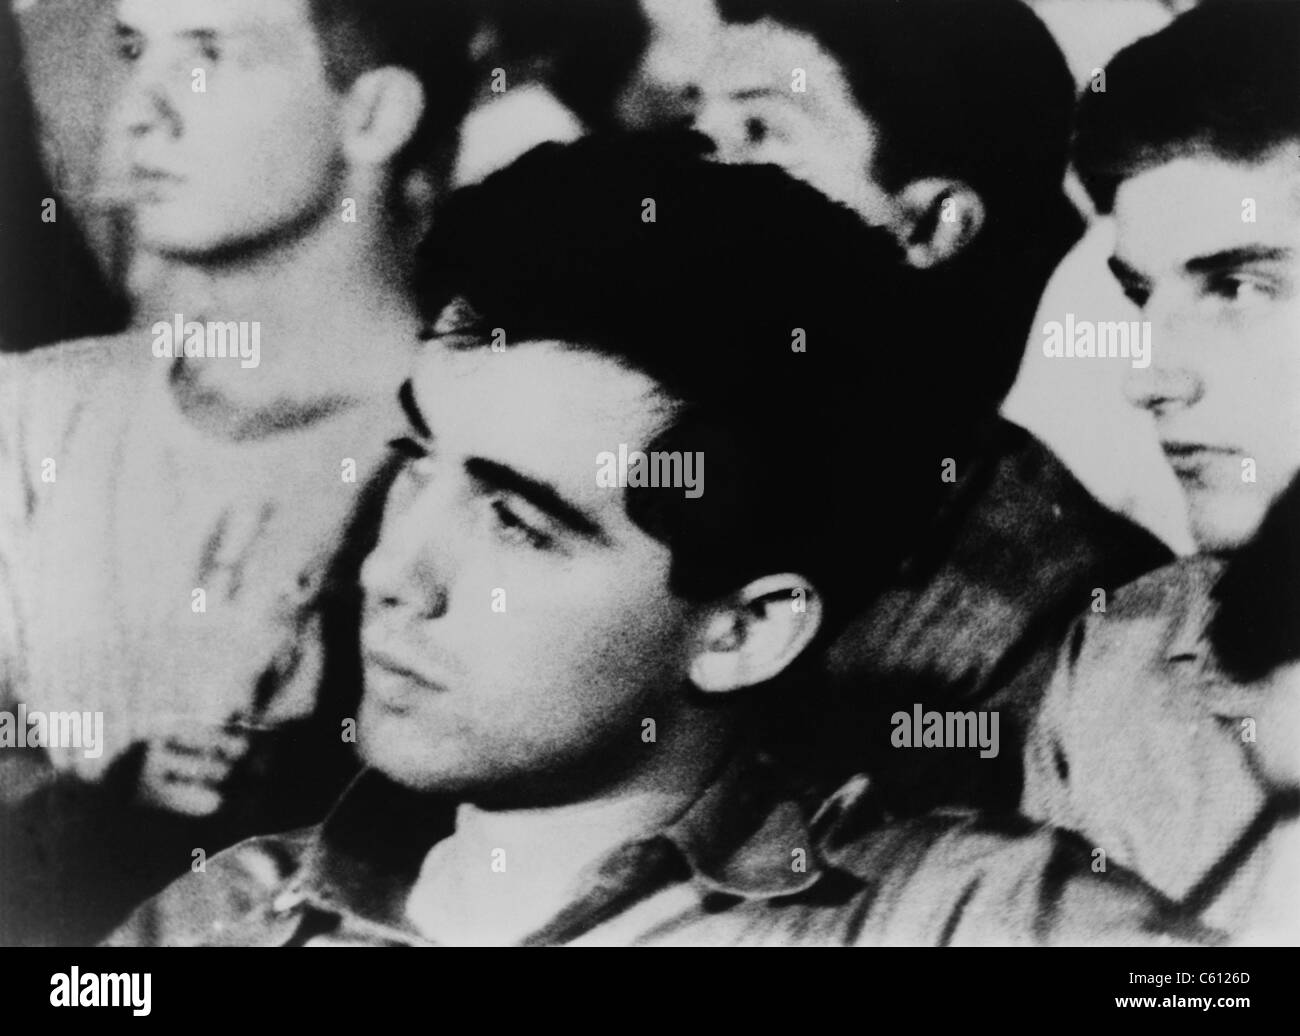 Andrew Goodman, (1943-1964), volunteered for the 1964 Freedom Summer' project of the Congress of Racial Equality (CORE) to register blacks to vote in Mississippi. He was one of three CORE volunteers murdered on June 21, 1964 by Ku Klux Klan members assisted by local government officials. Stock Photo